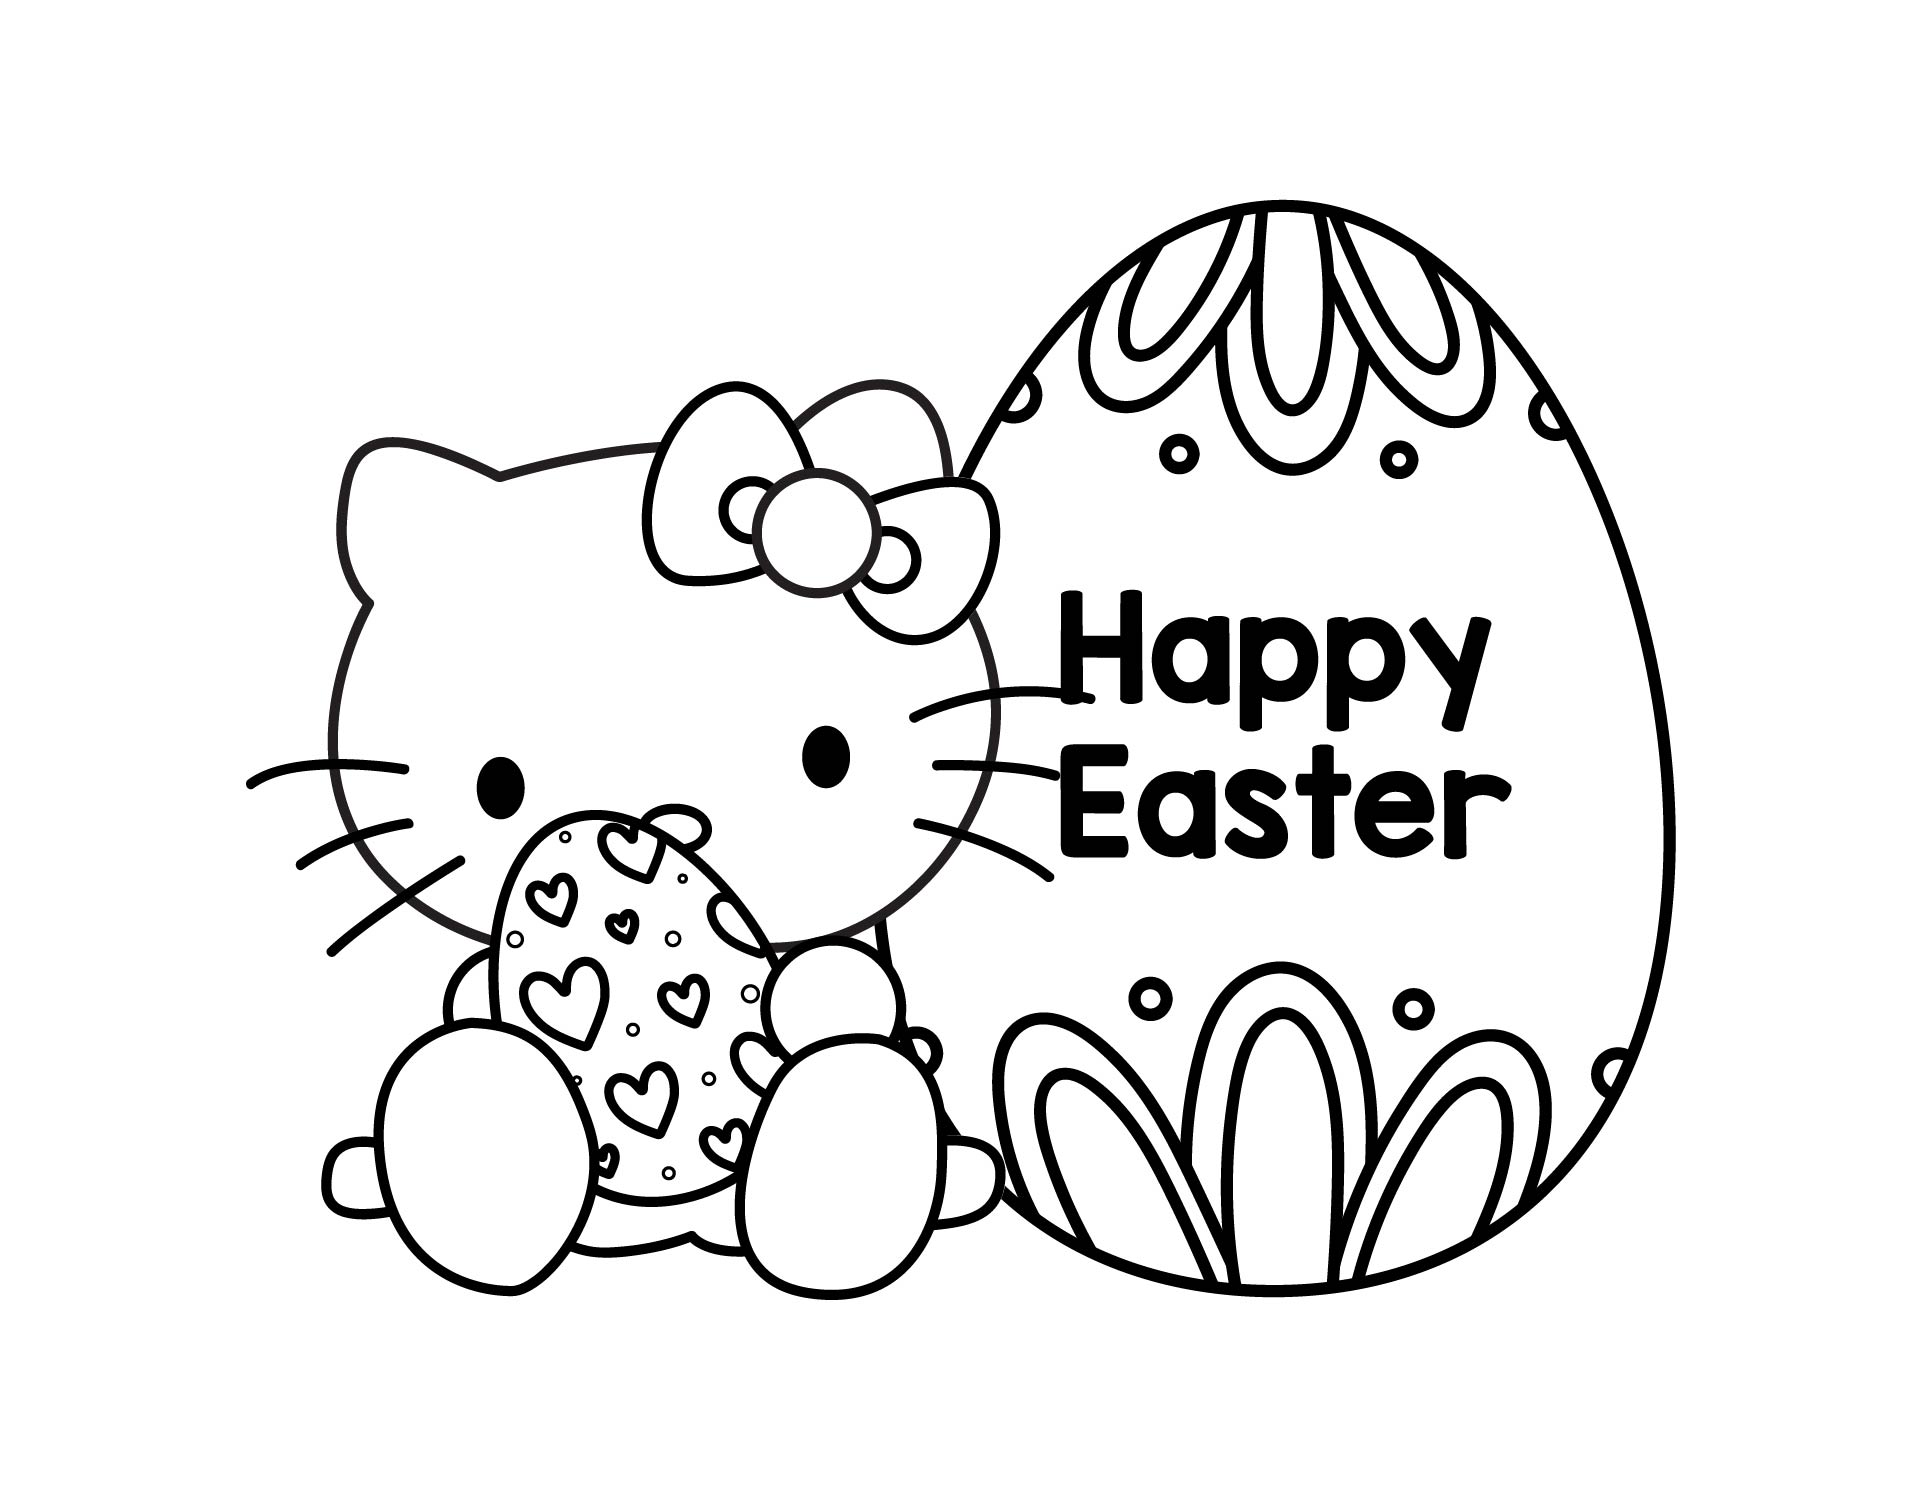 Hello Kitty Happy Easter Printable Coloring Pages